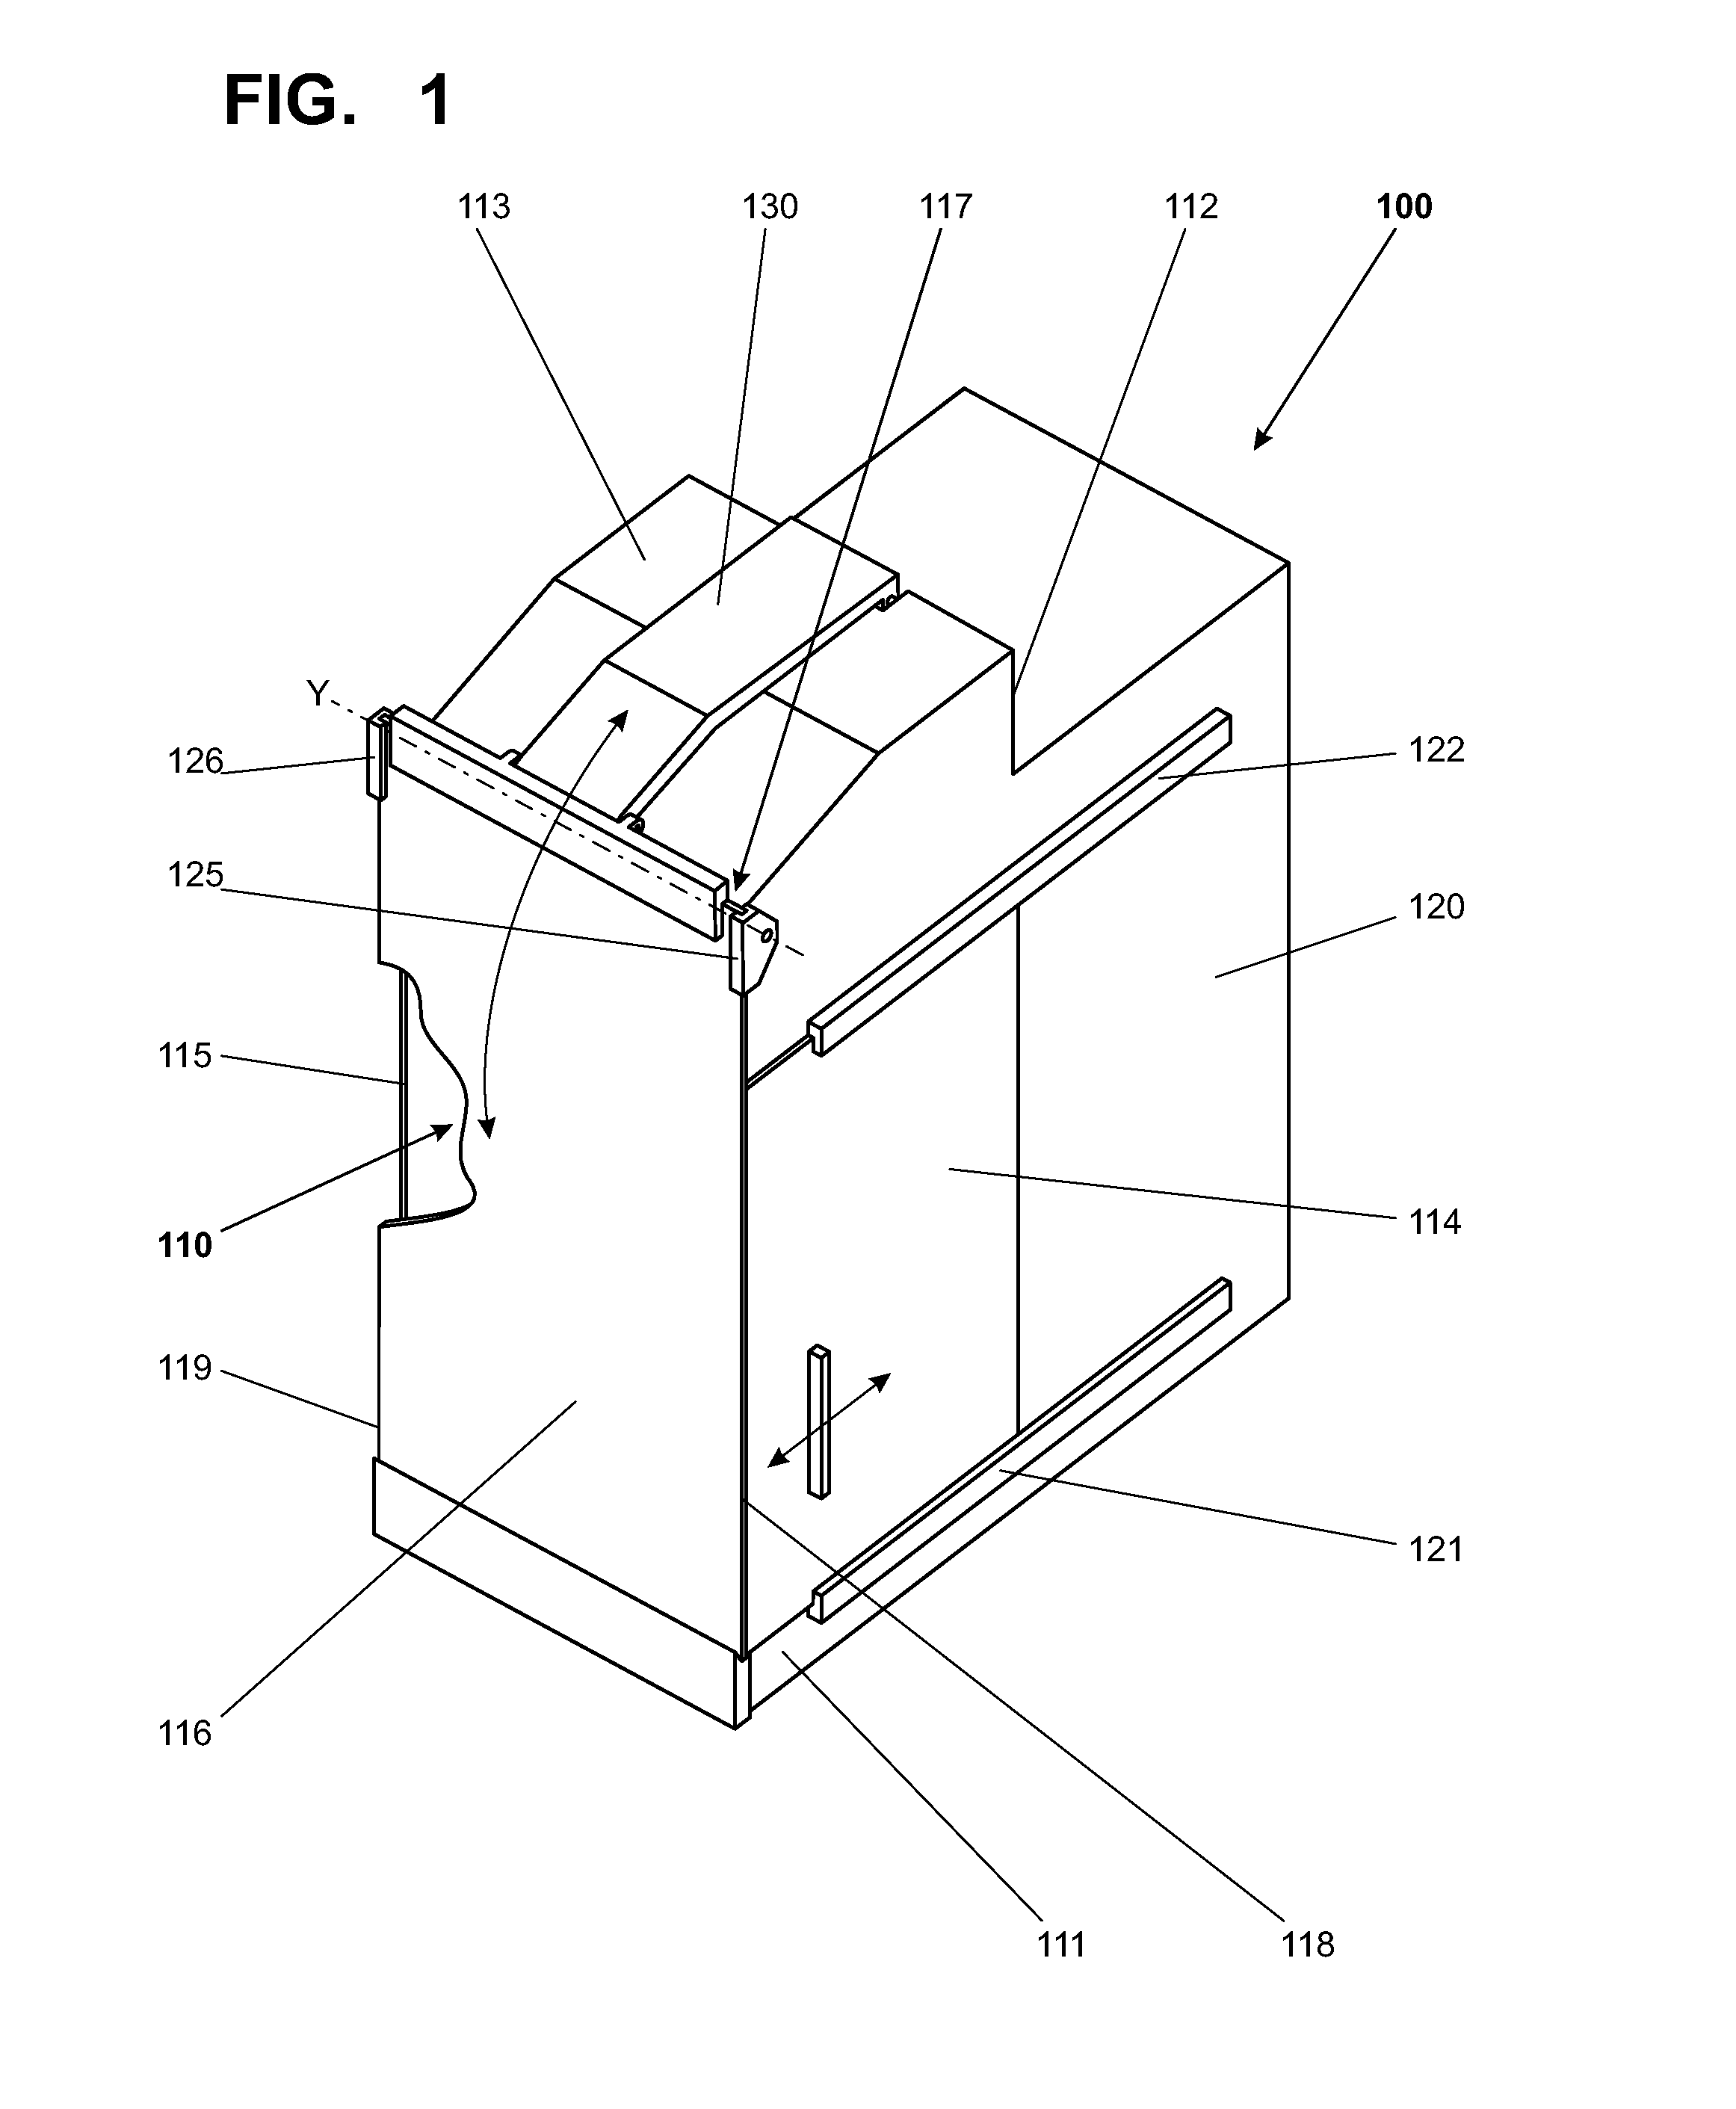 Laboratory instrument with a protected working compartment